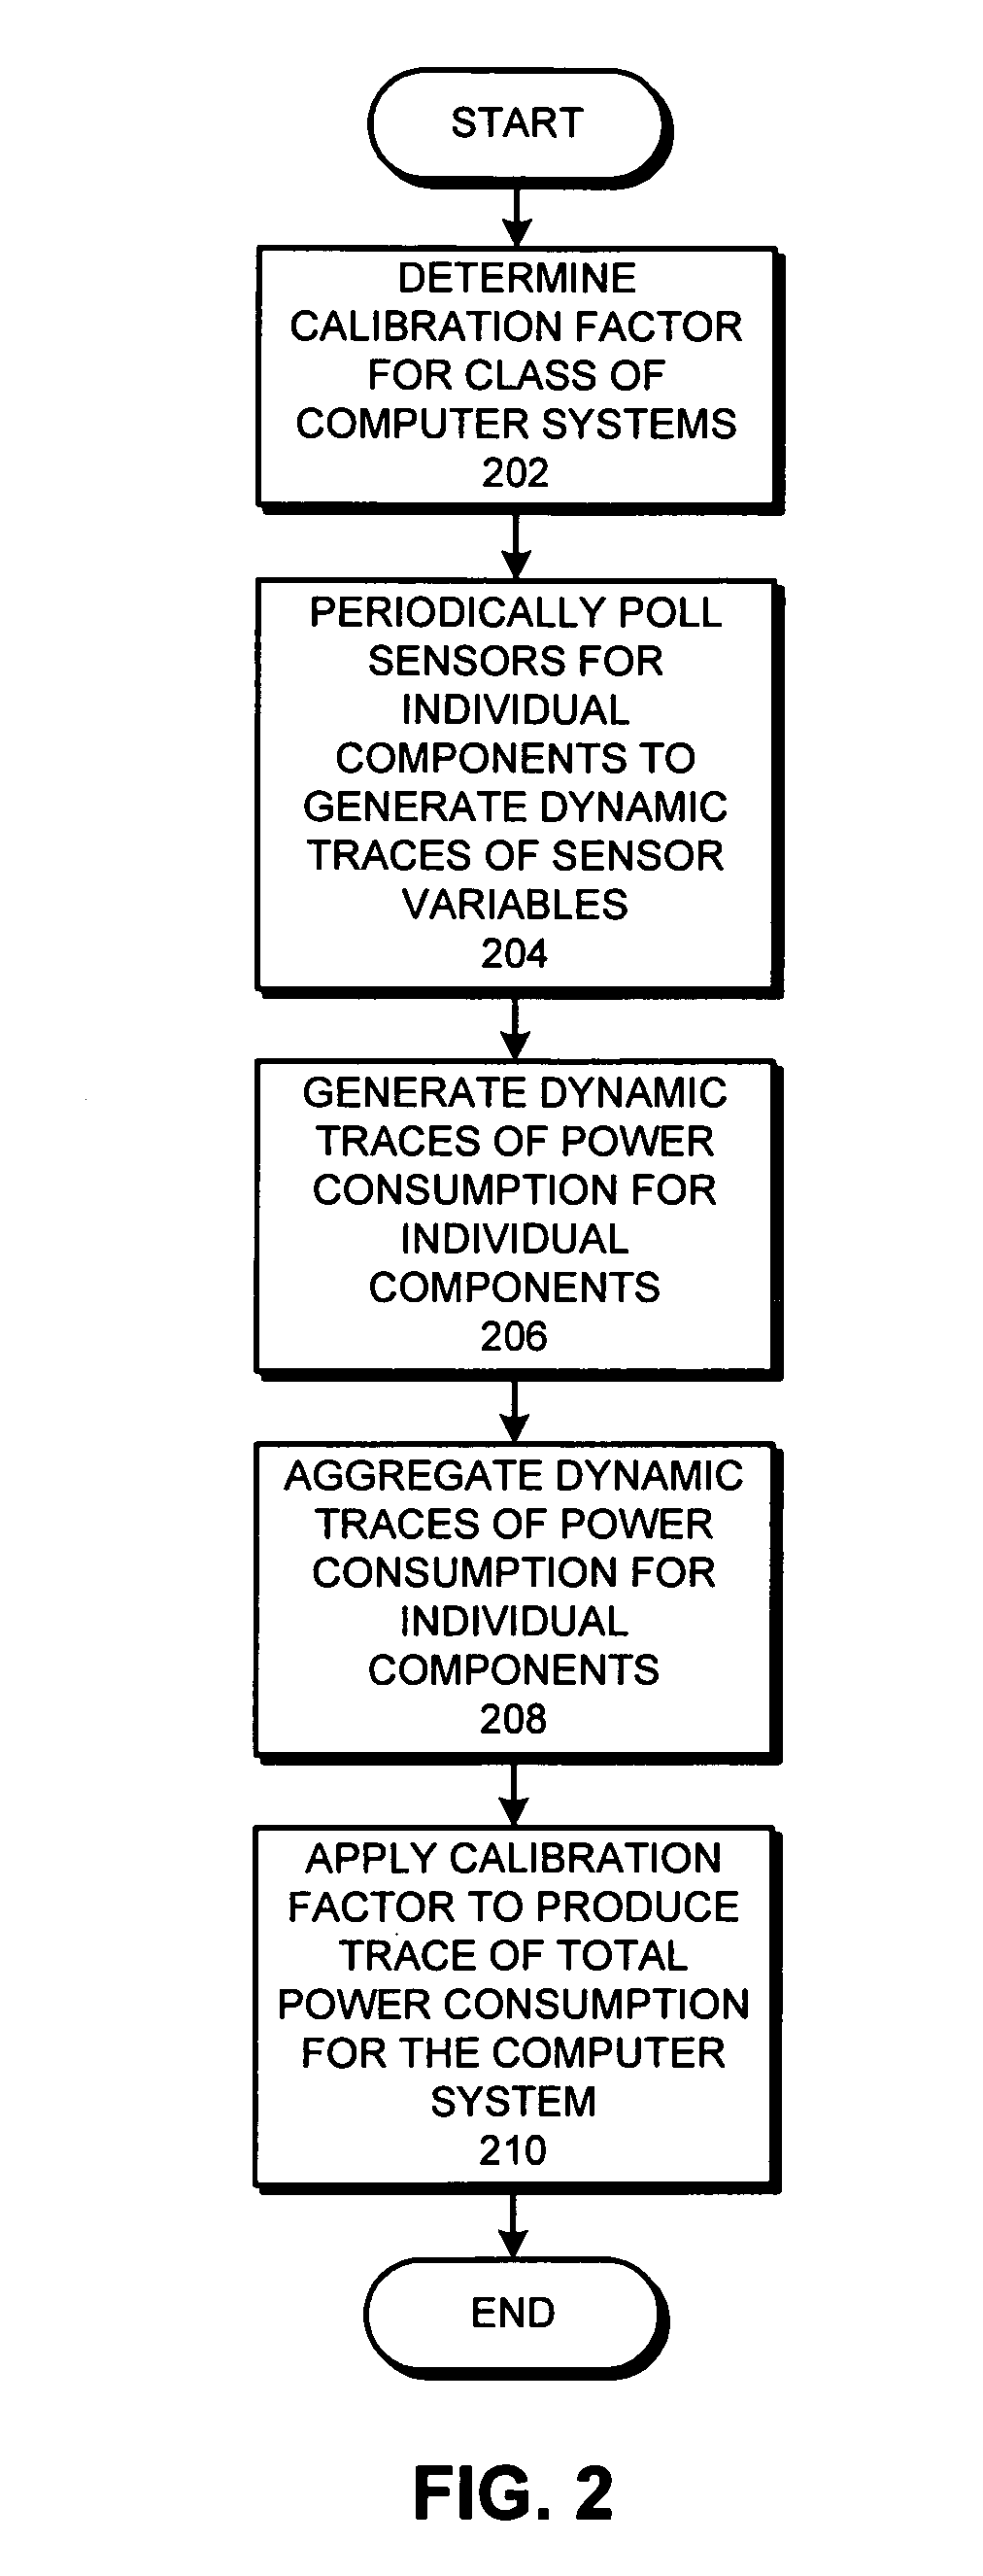 Method and apparatus for balancing thermal variations across a set of computer systems